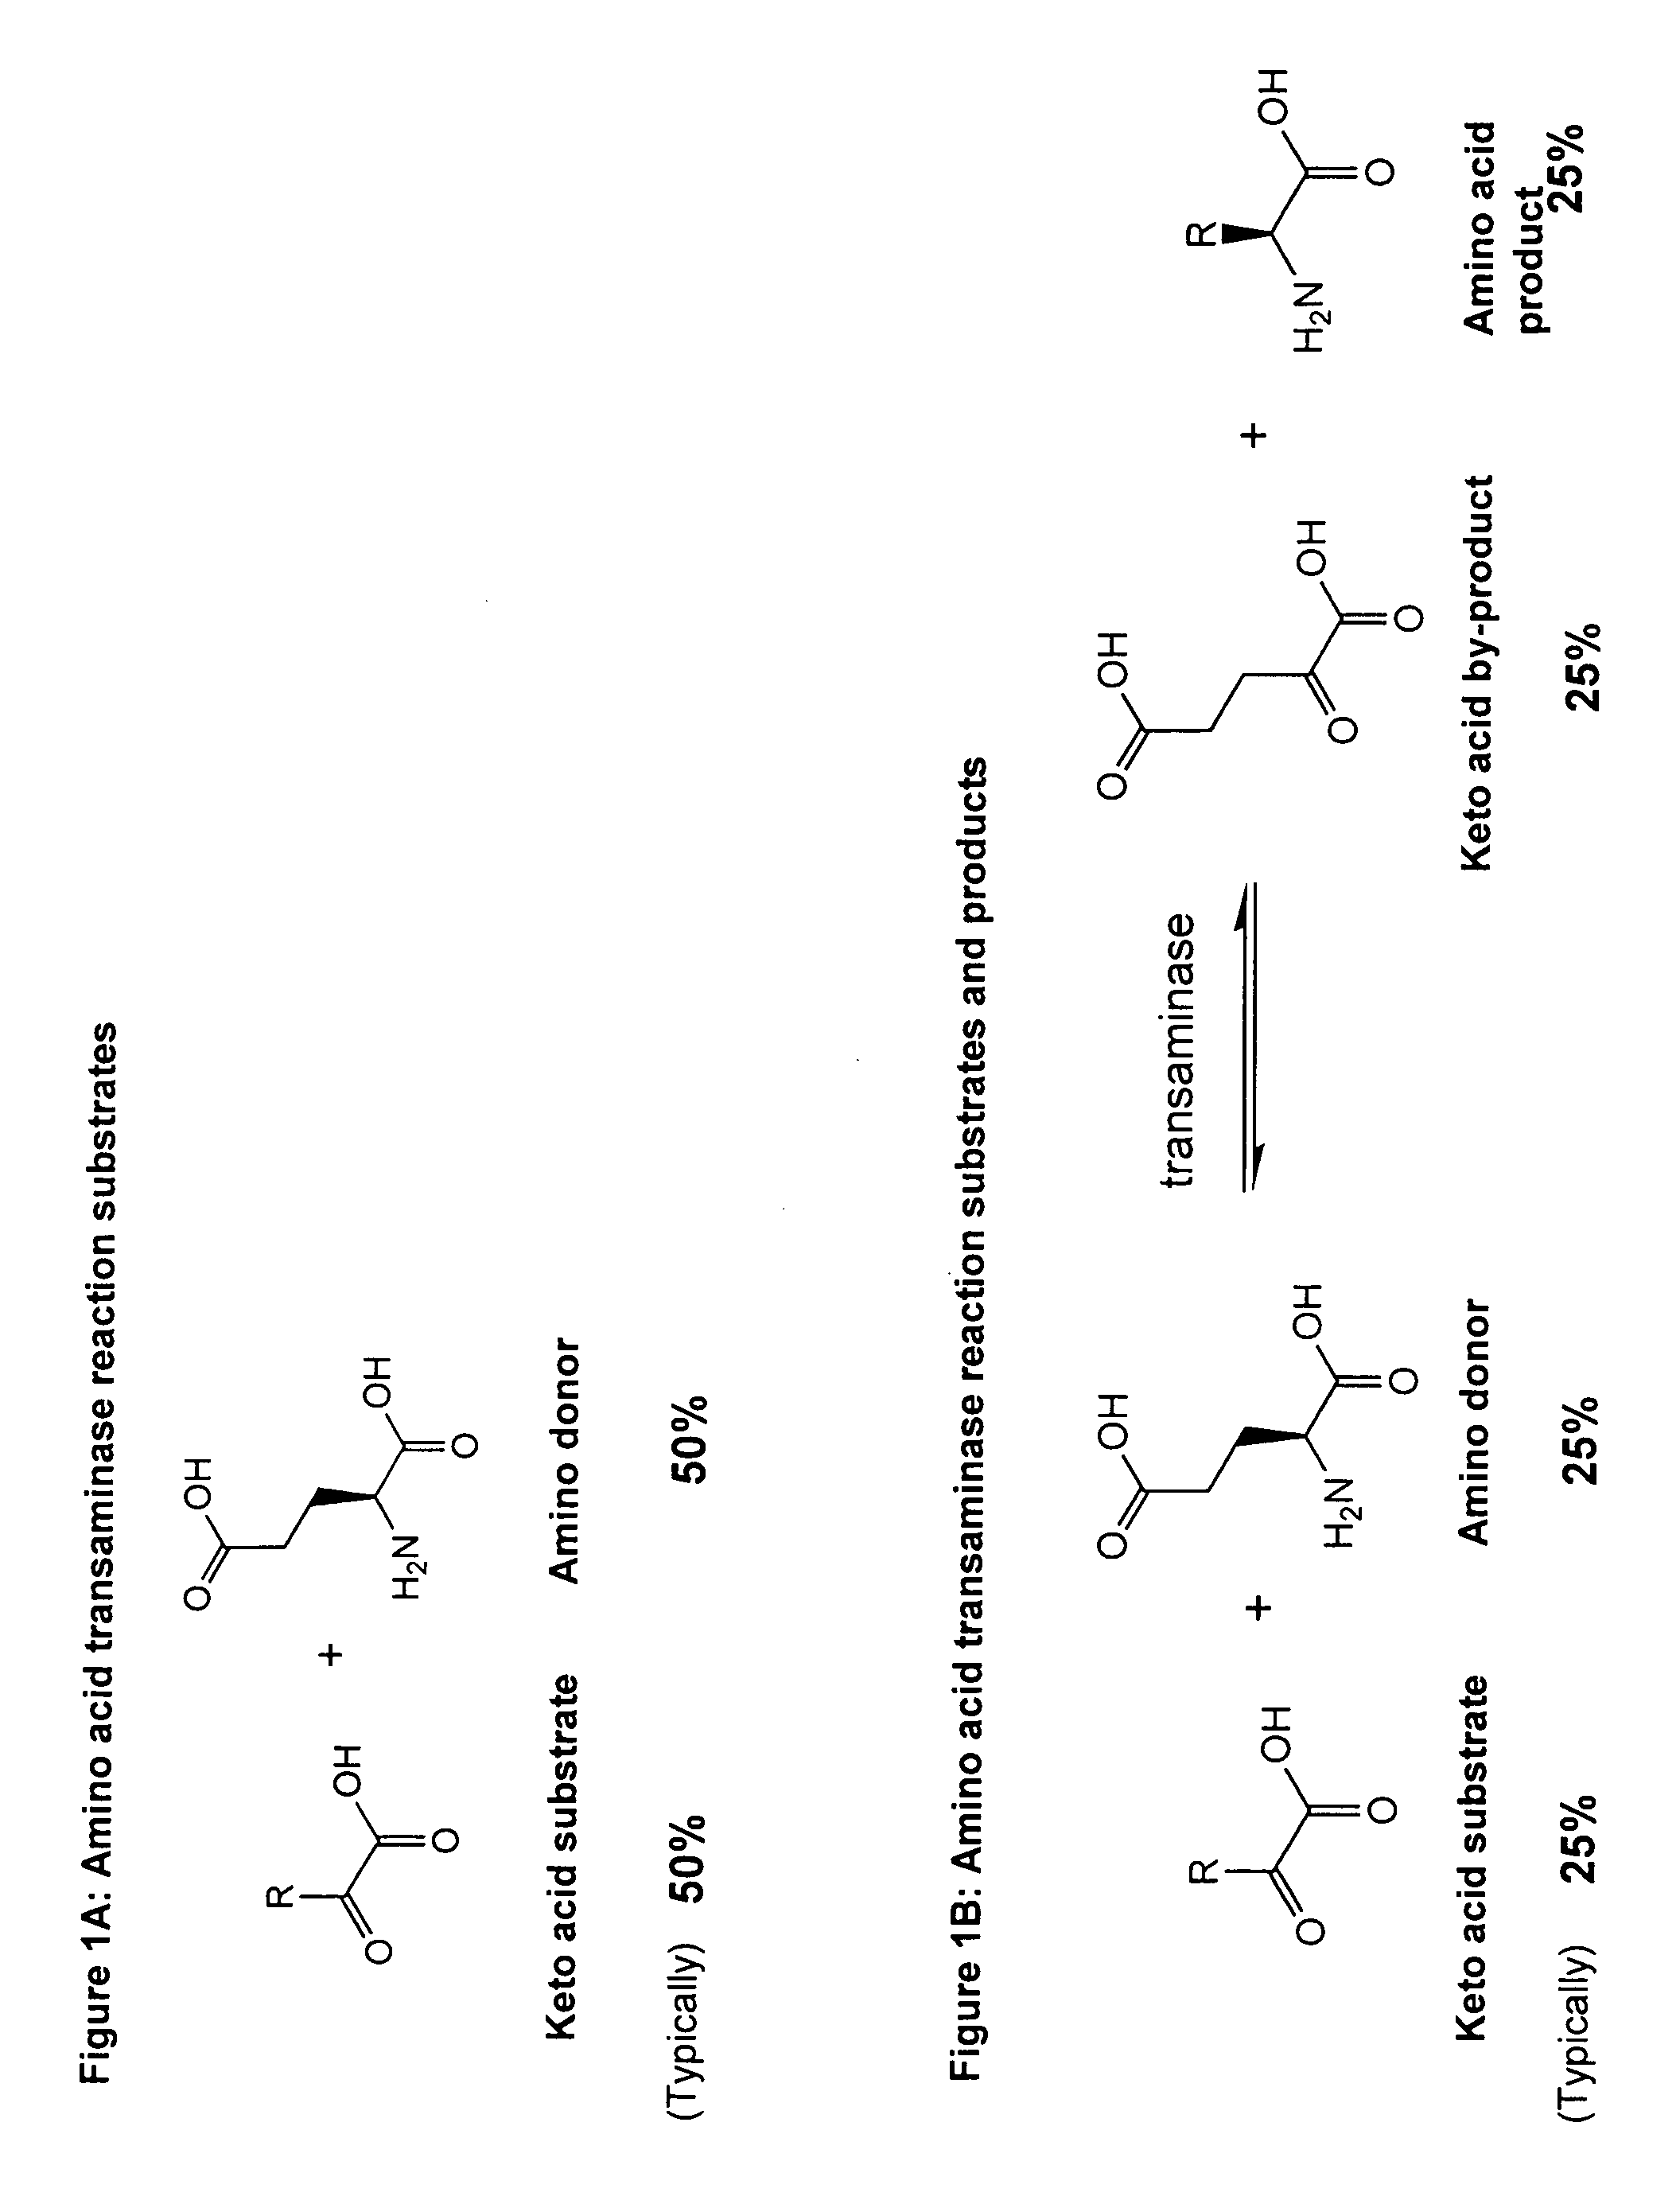 Method to increase the yield and improve purification of products from transaminase reactions